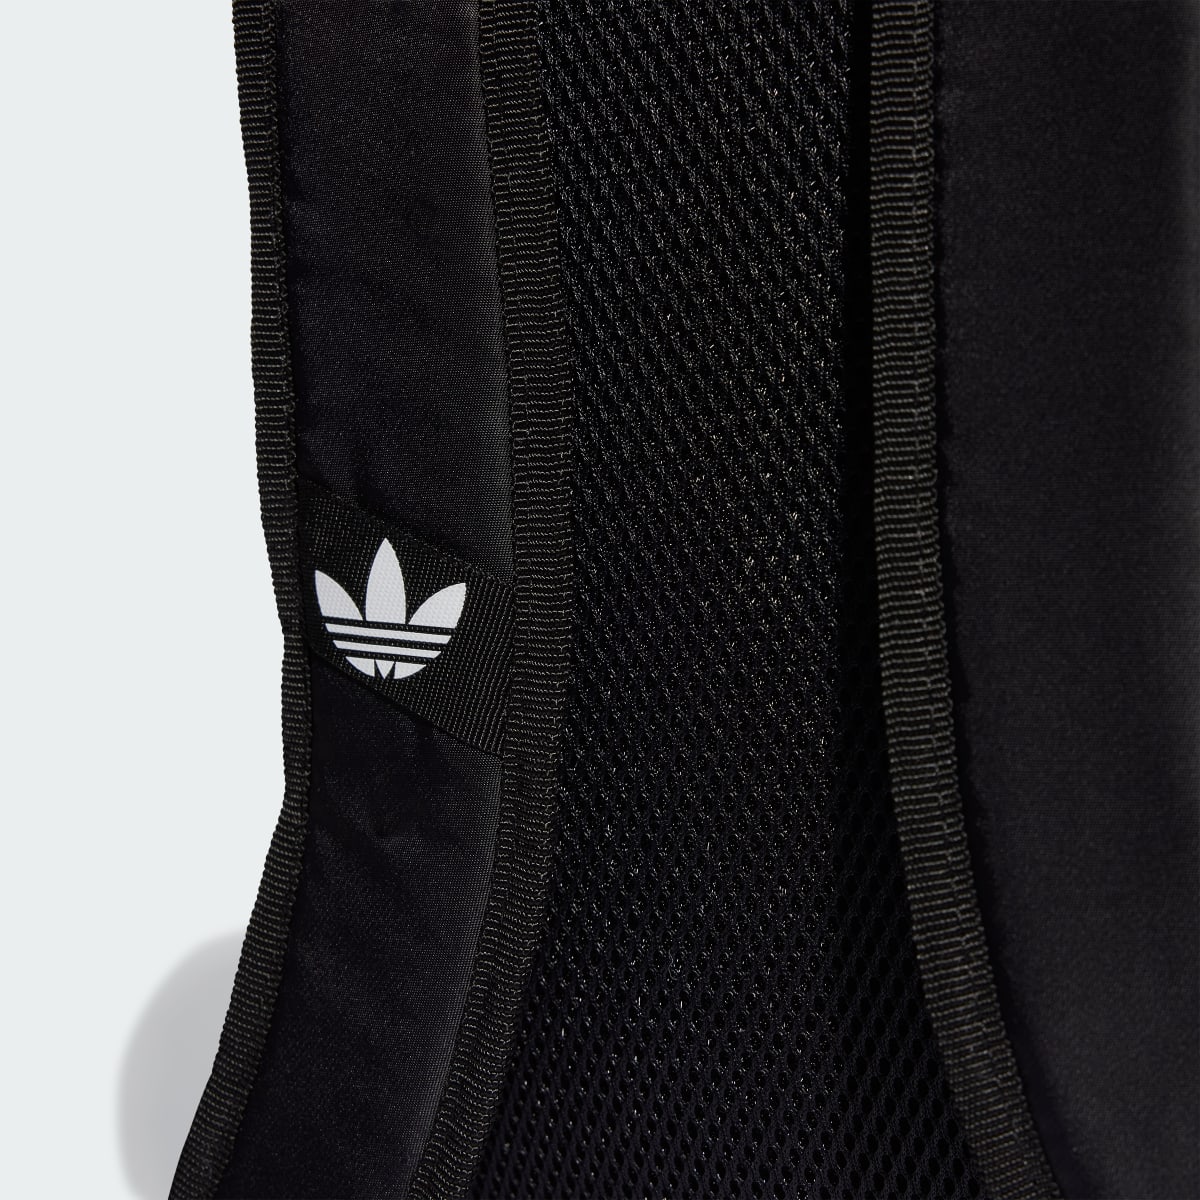 Adidas Adicolor Archive Backpack. 7